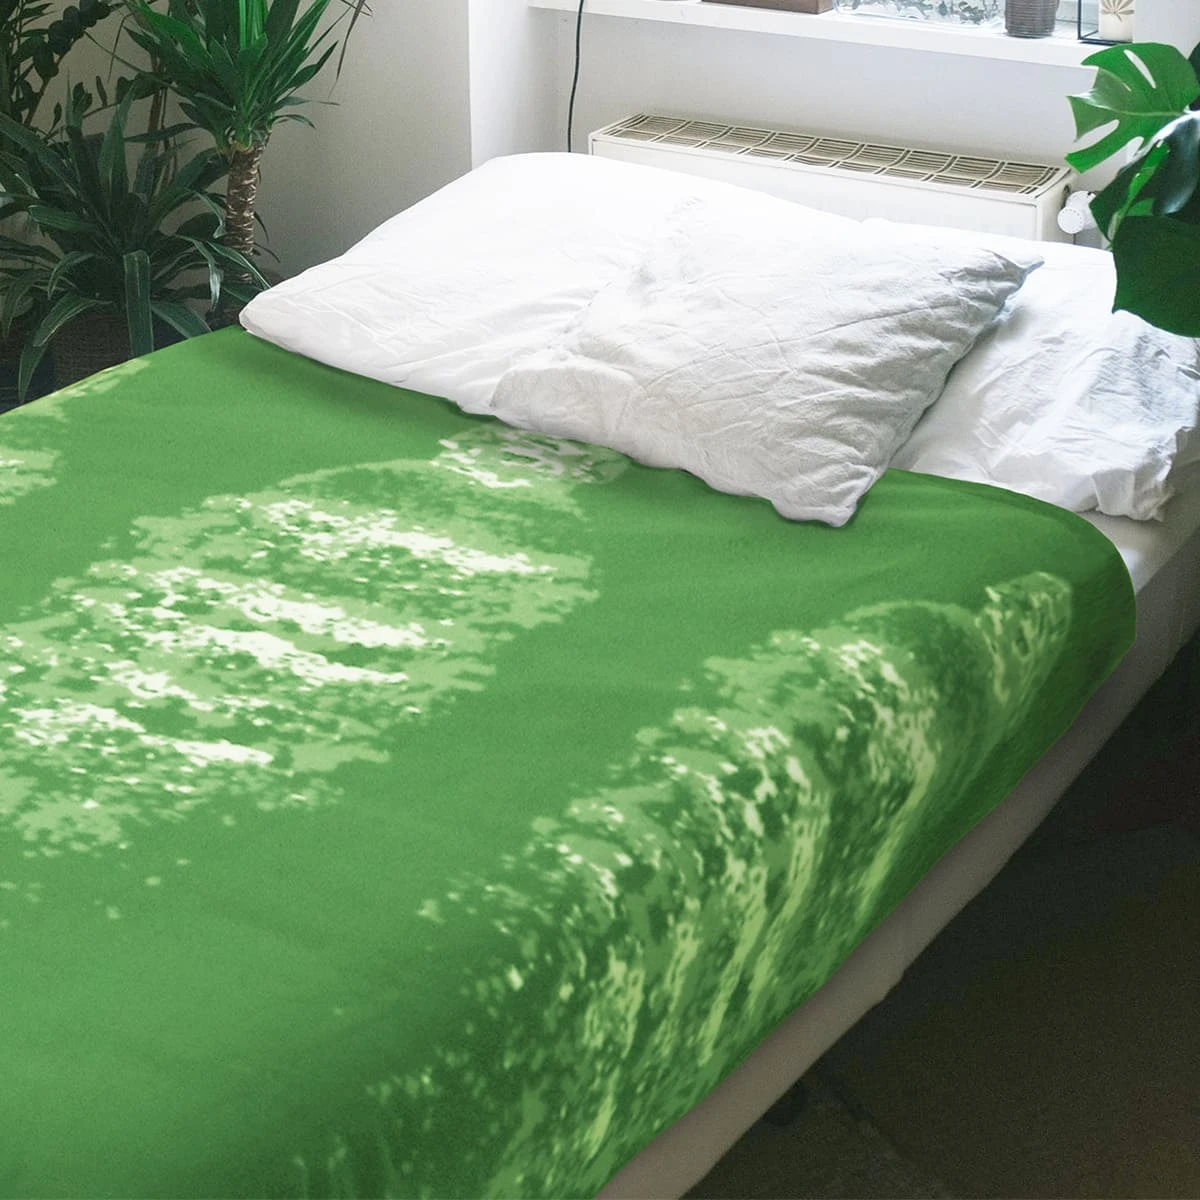 100% Recycled Polyester Bottles Printed Fleece Blanket - I Love Recycling (Green)